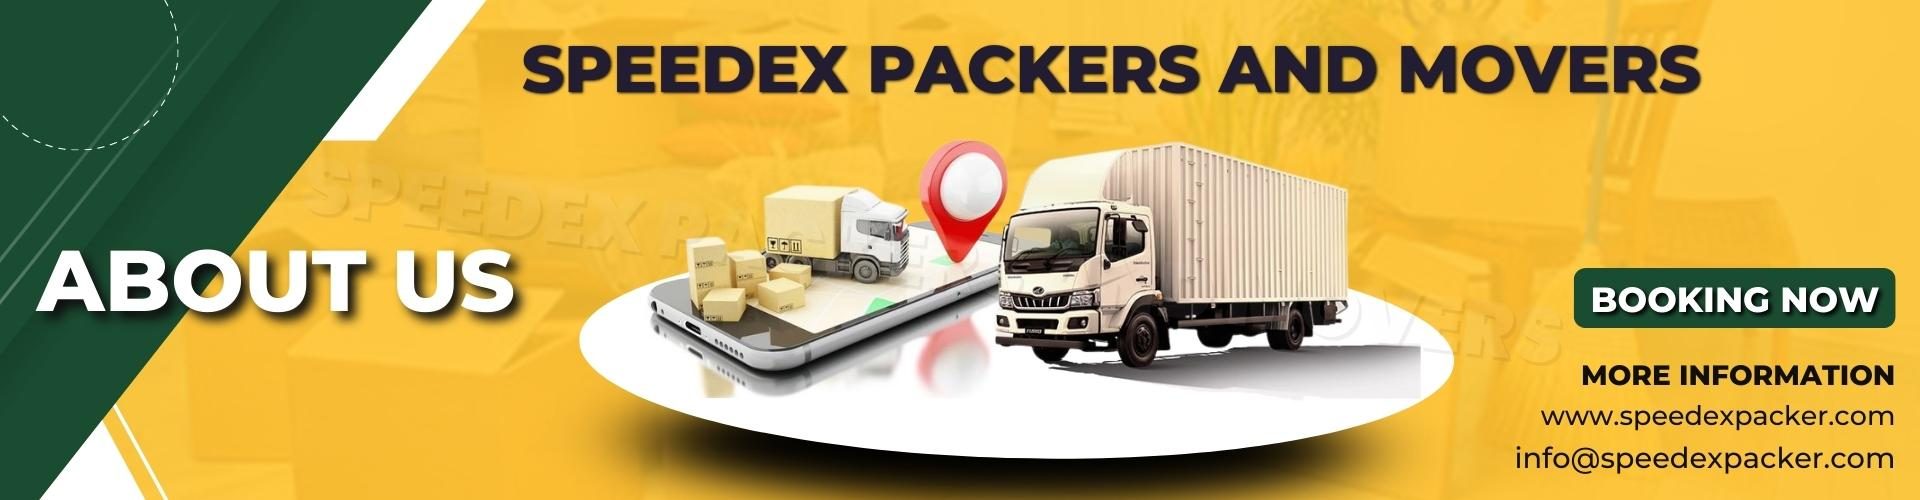 Speedex Packers and Movers (speedexpacker.com) About Us img (1)